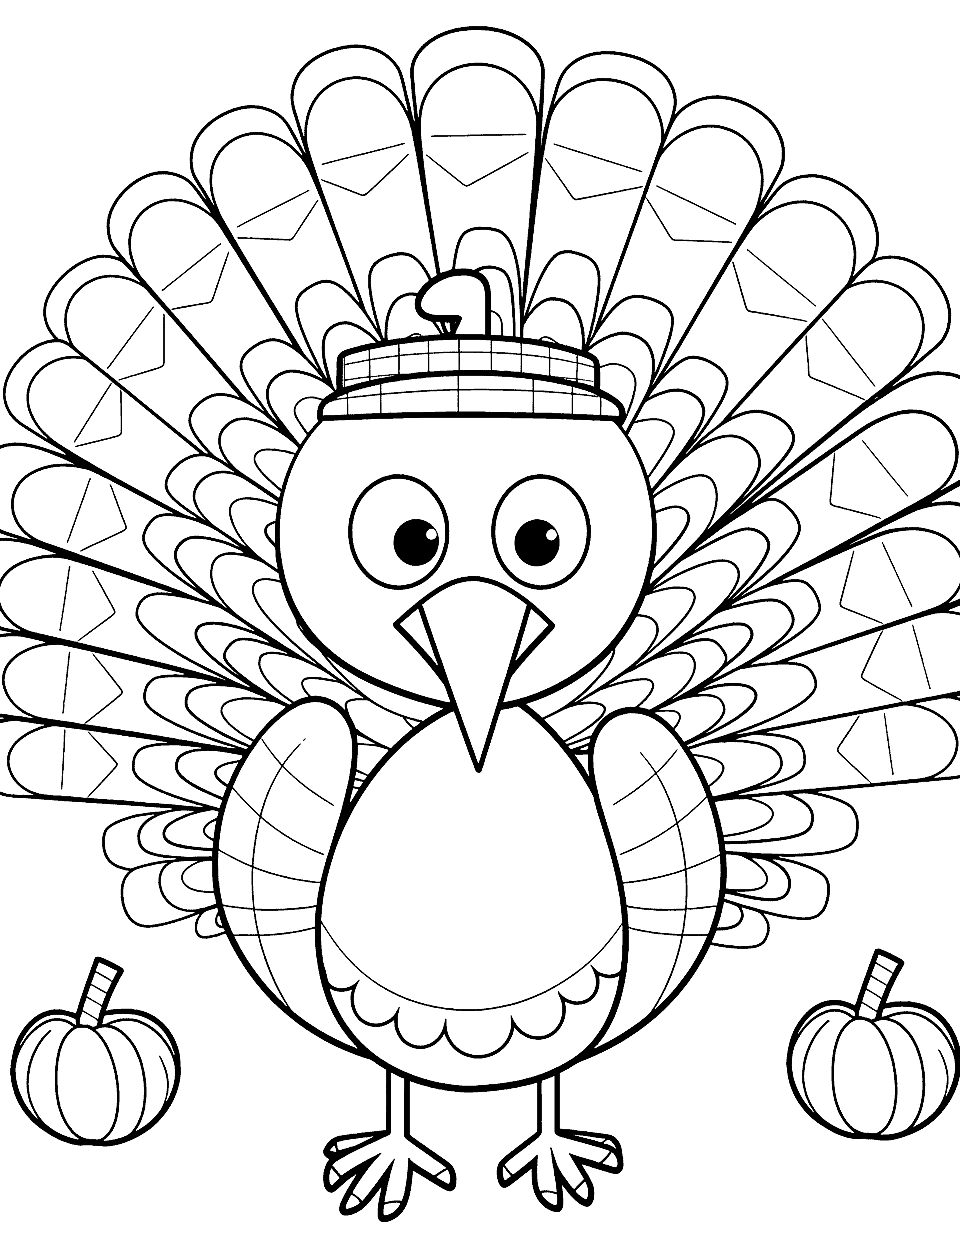 Kindergarten Turkey Fun Thanksgiving Coloring Page - A page with a basic turkey design for kindergarten students.